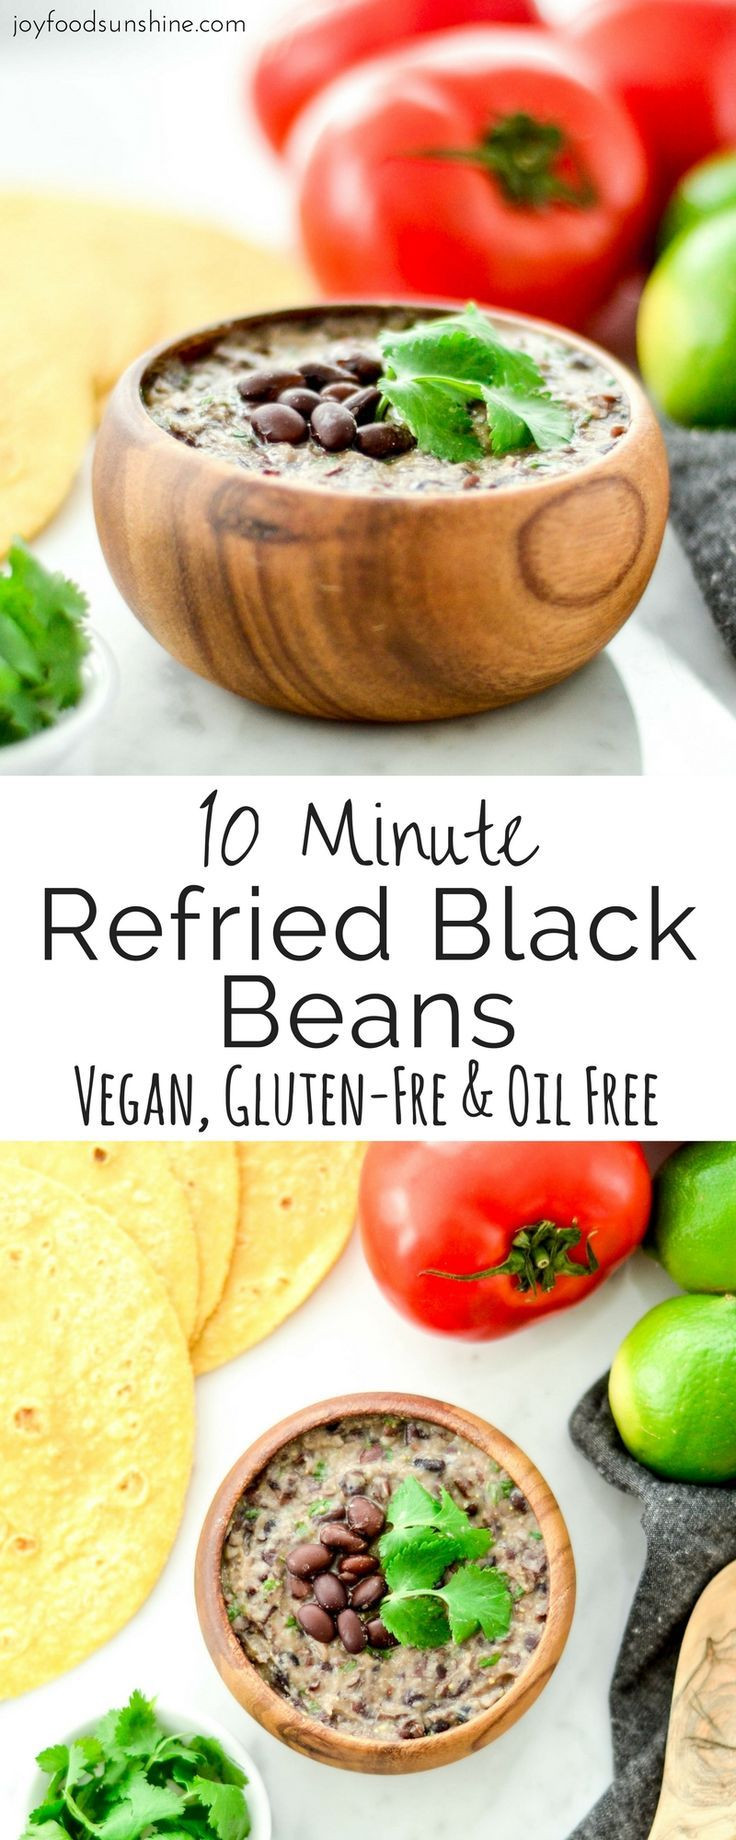 Vegan Refried Bean Recipes
 Homemade Refried Black Beans ready in 10 minutes The